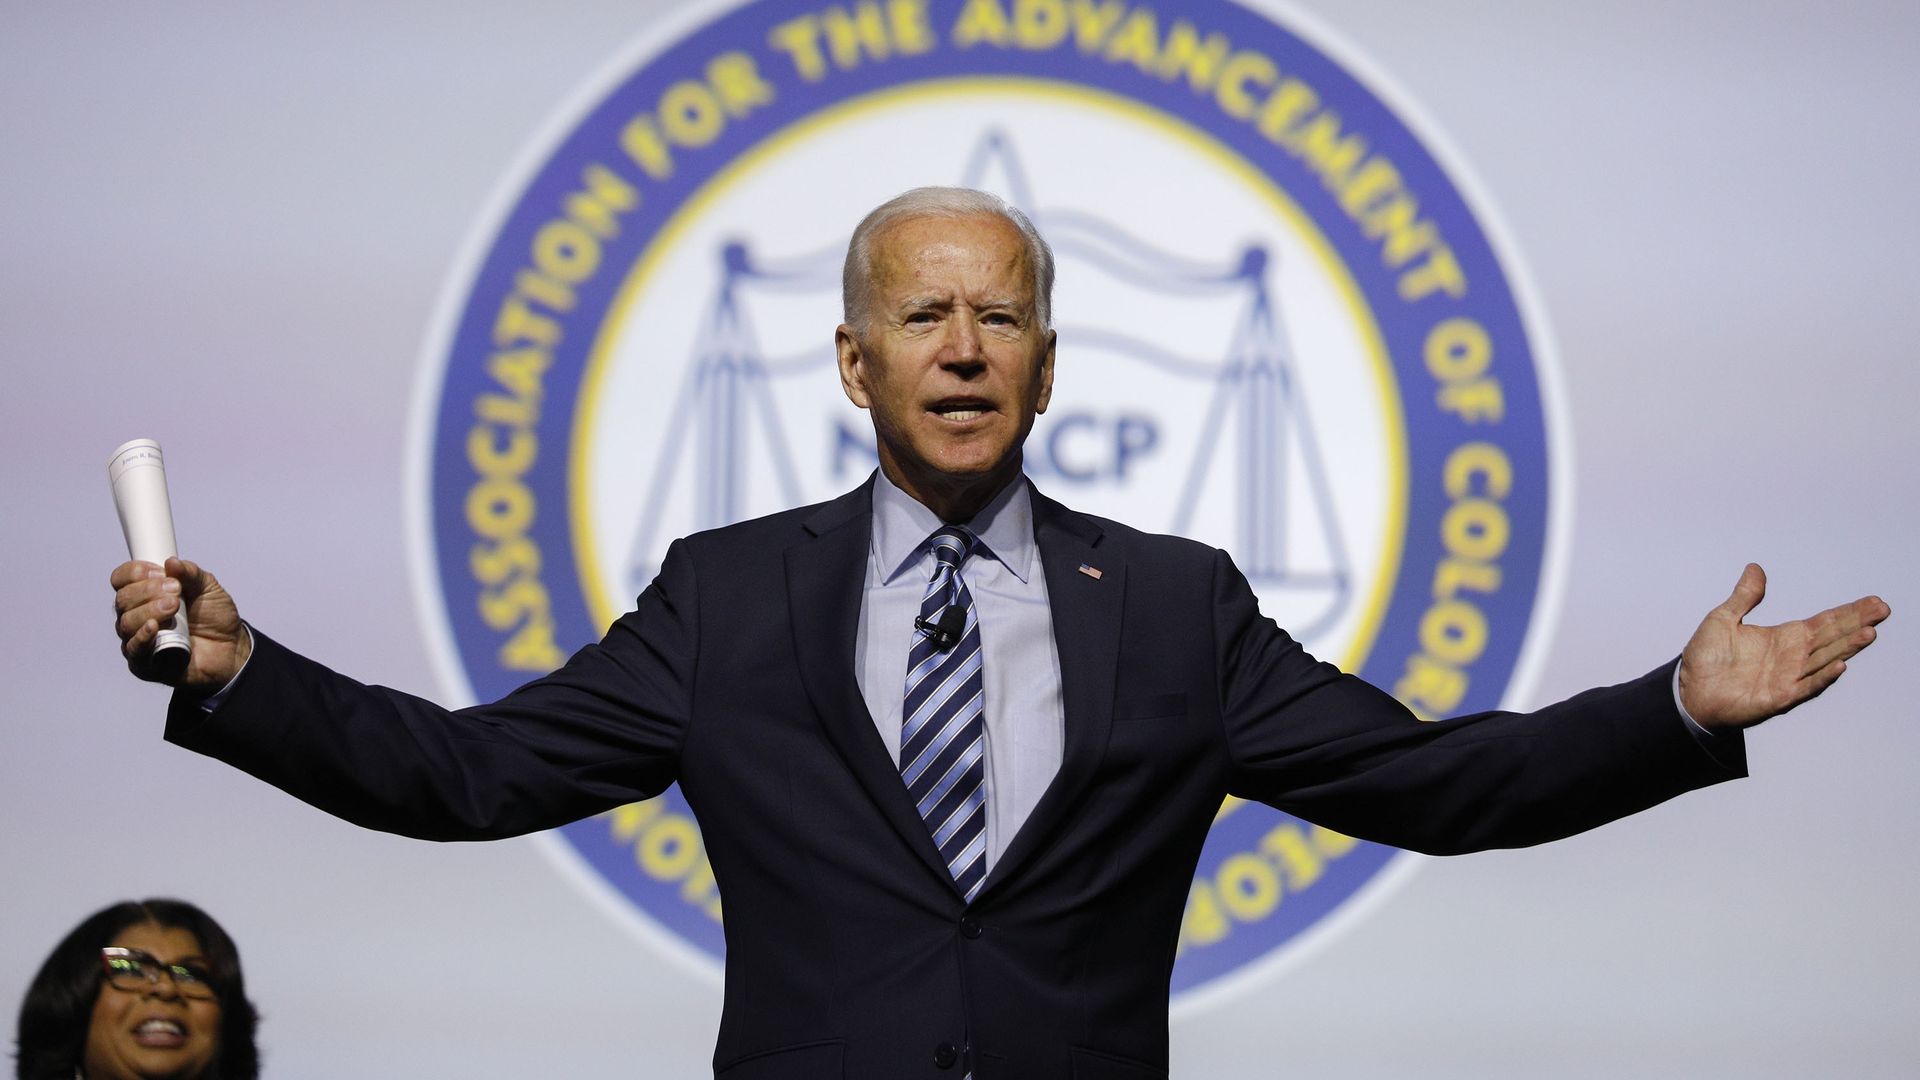 Photo of Joe Biden with his arms raised at the NAACP 110th National Convention in 2019